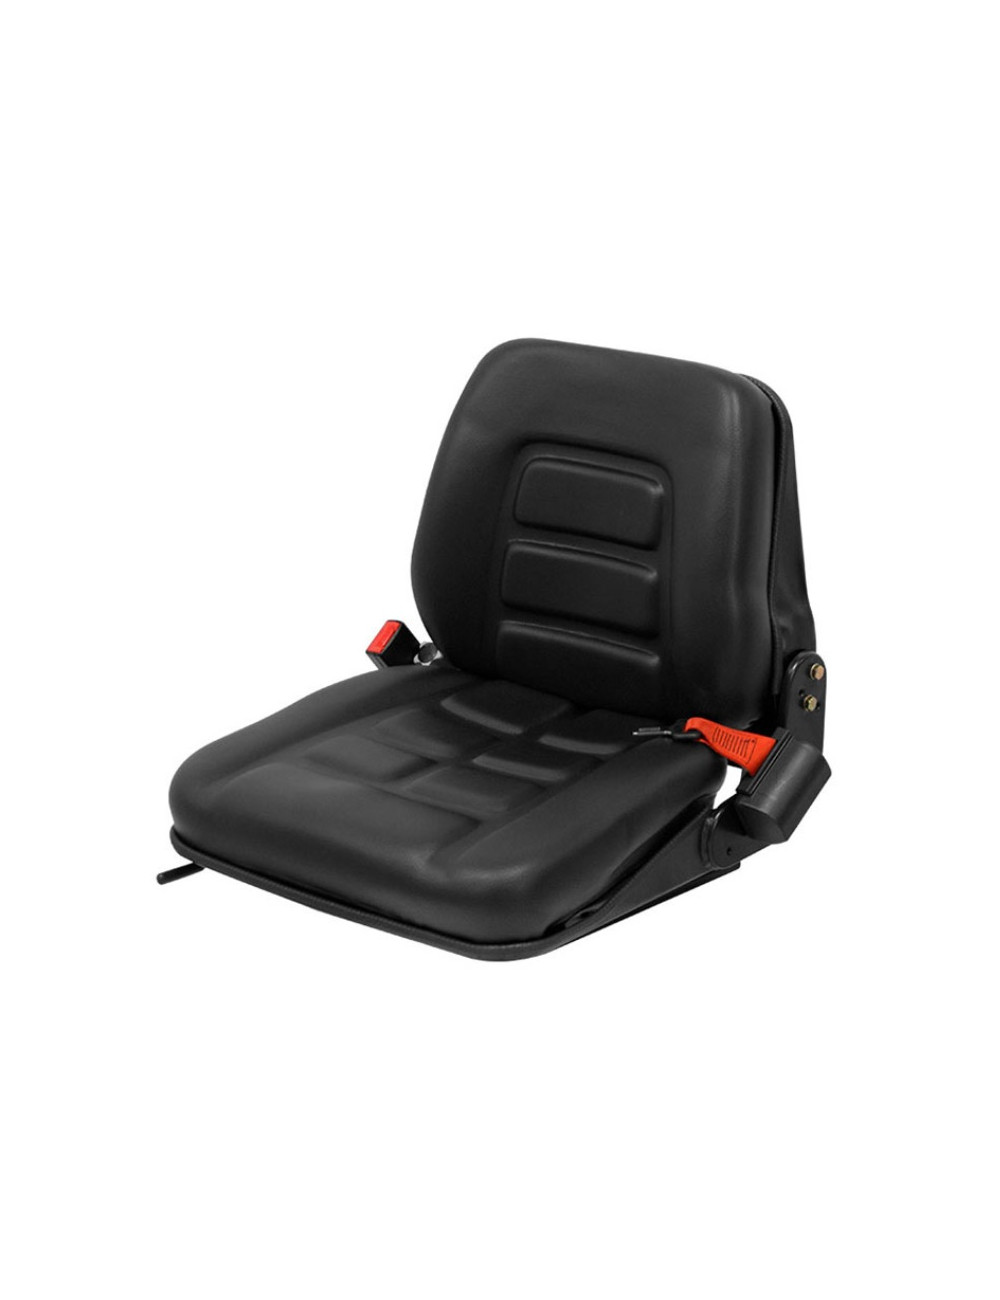 Asiento tractor universal c/apoyabrazos, suspension regulable, c/base  inclinable, pvc negro